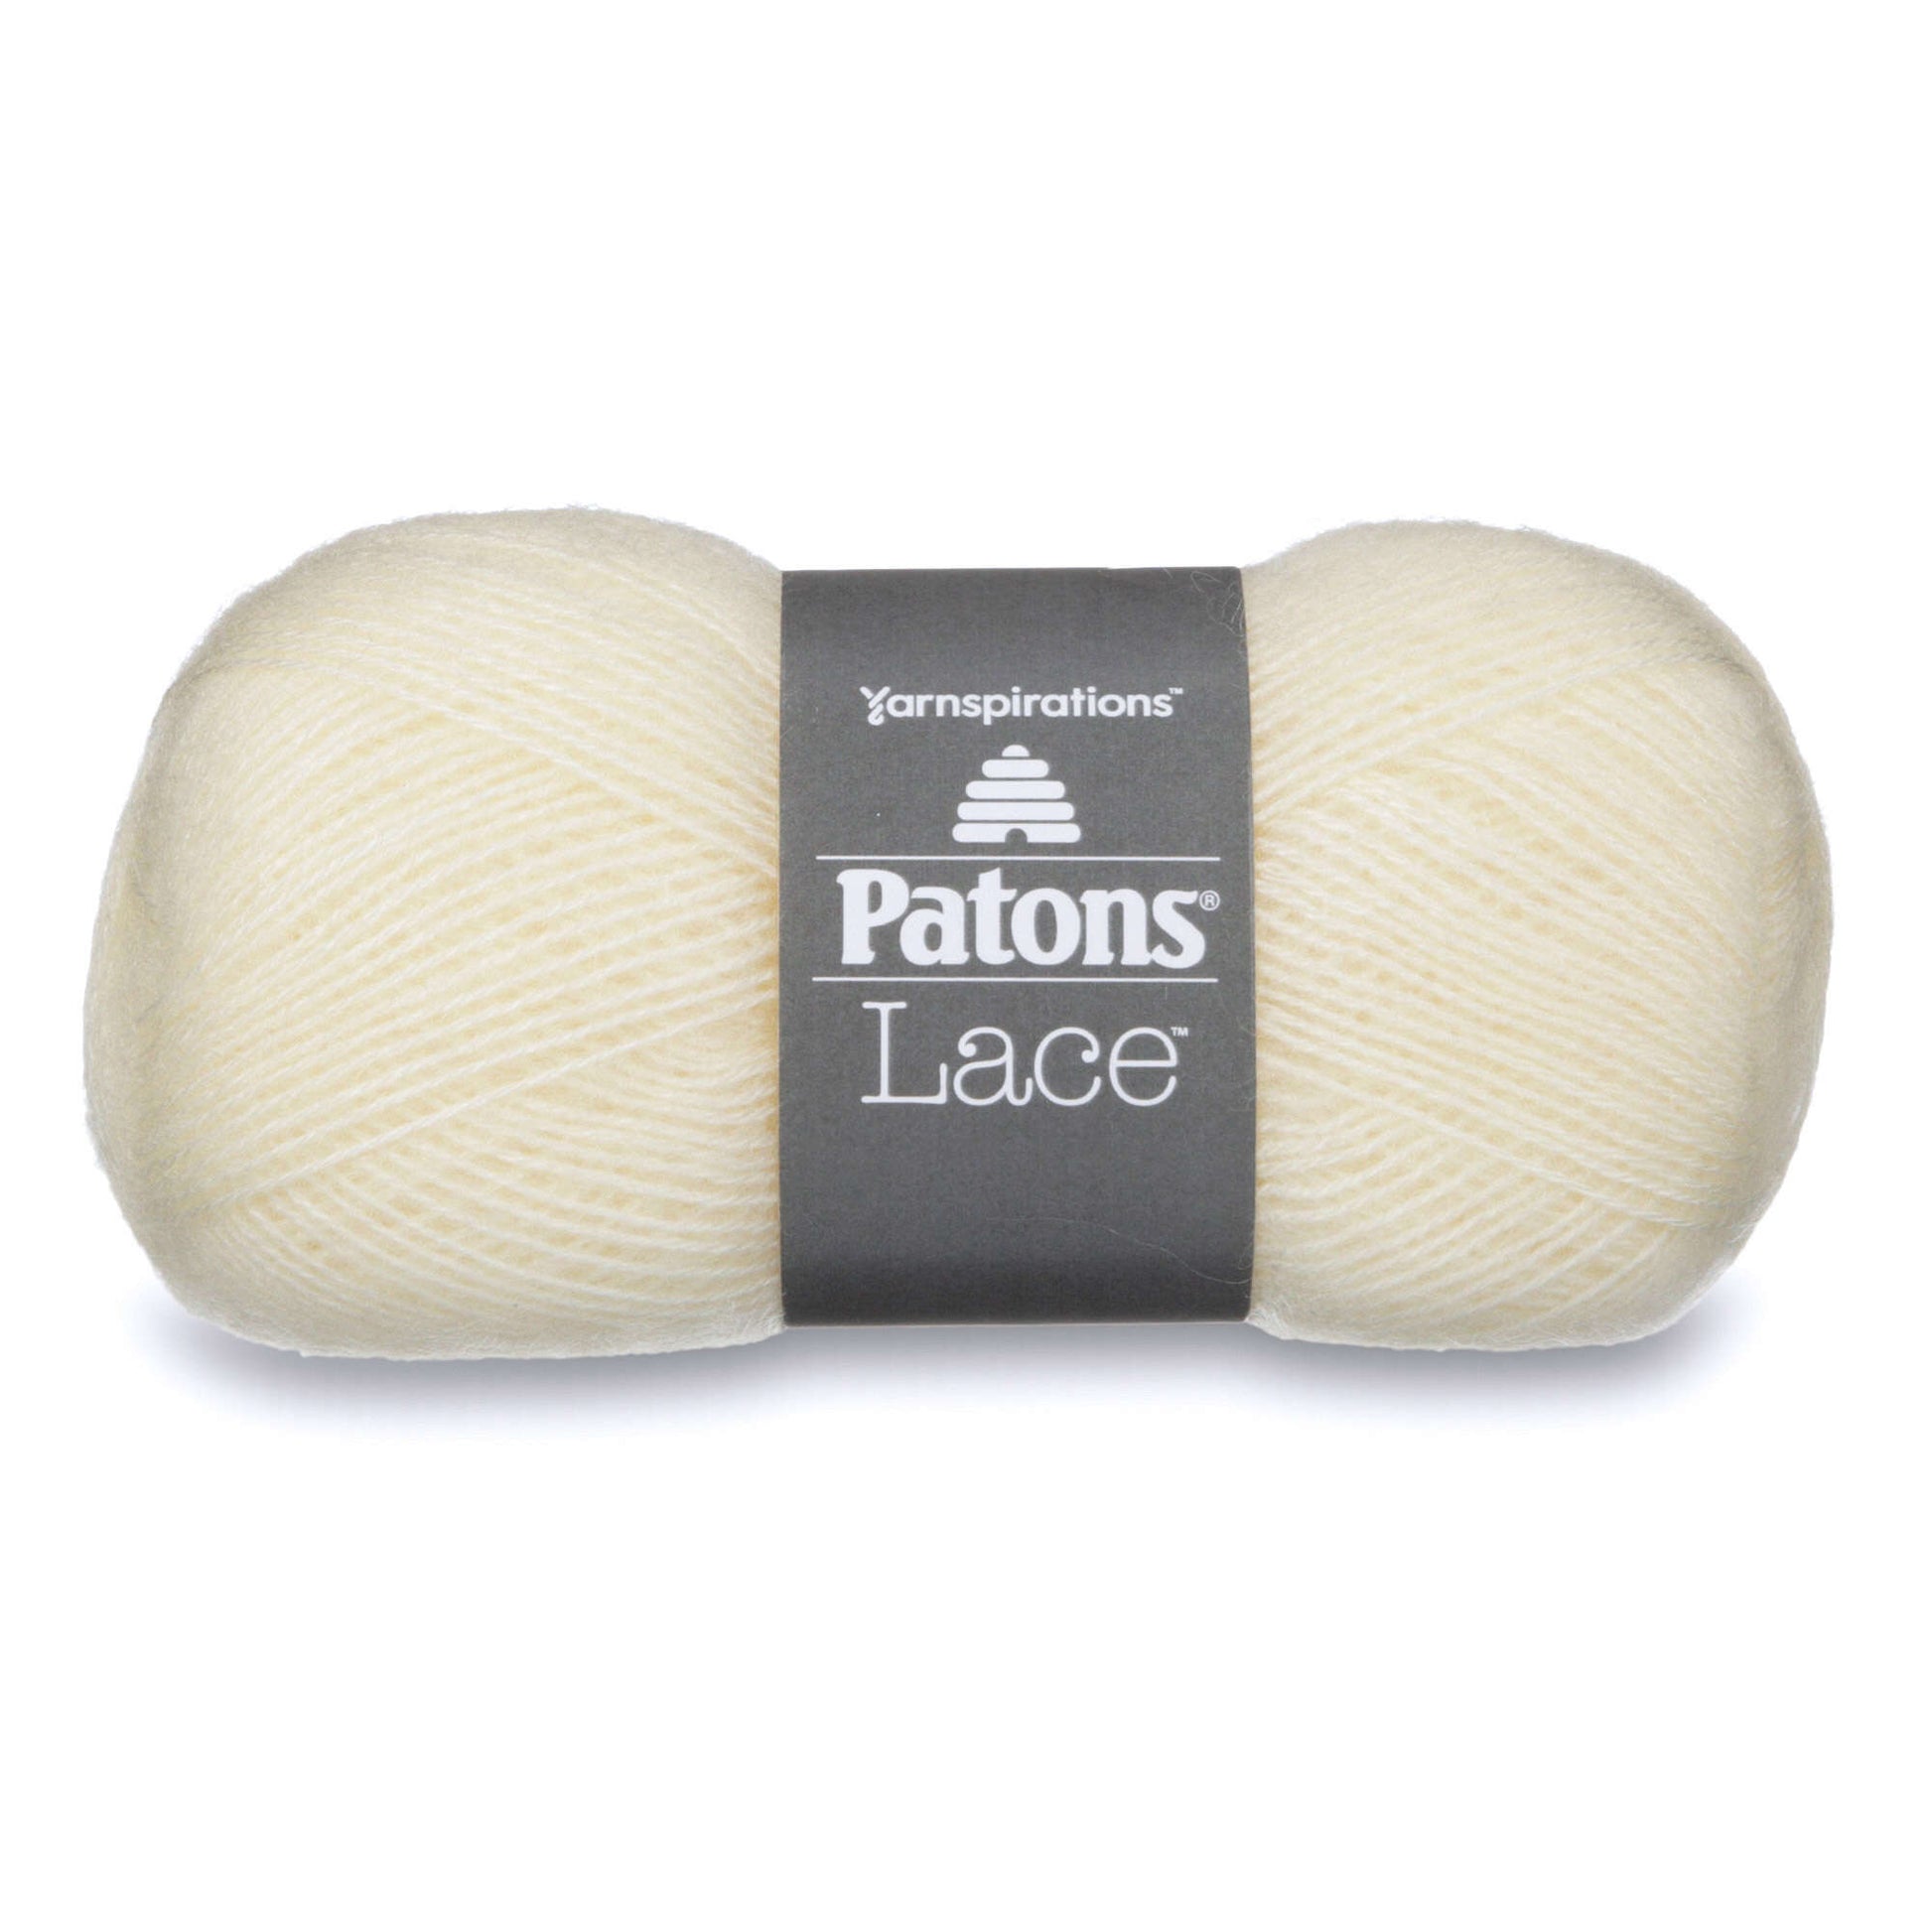 Patons Lace Yarn - Discontinued Vintage